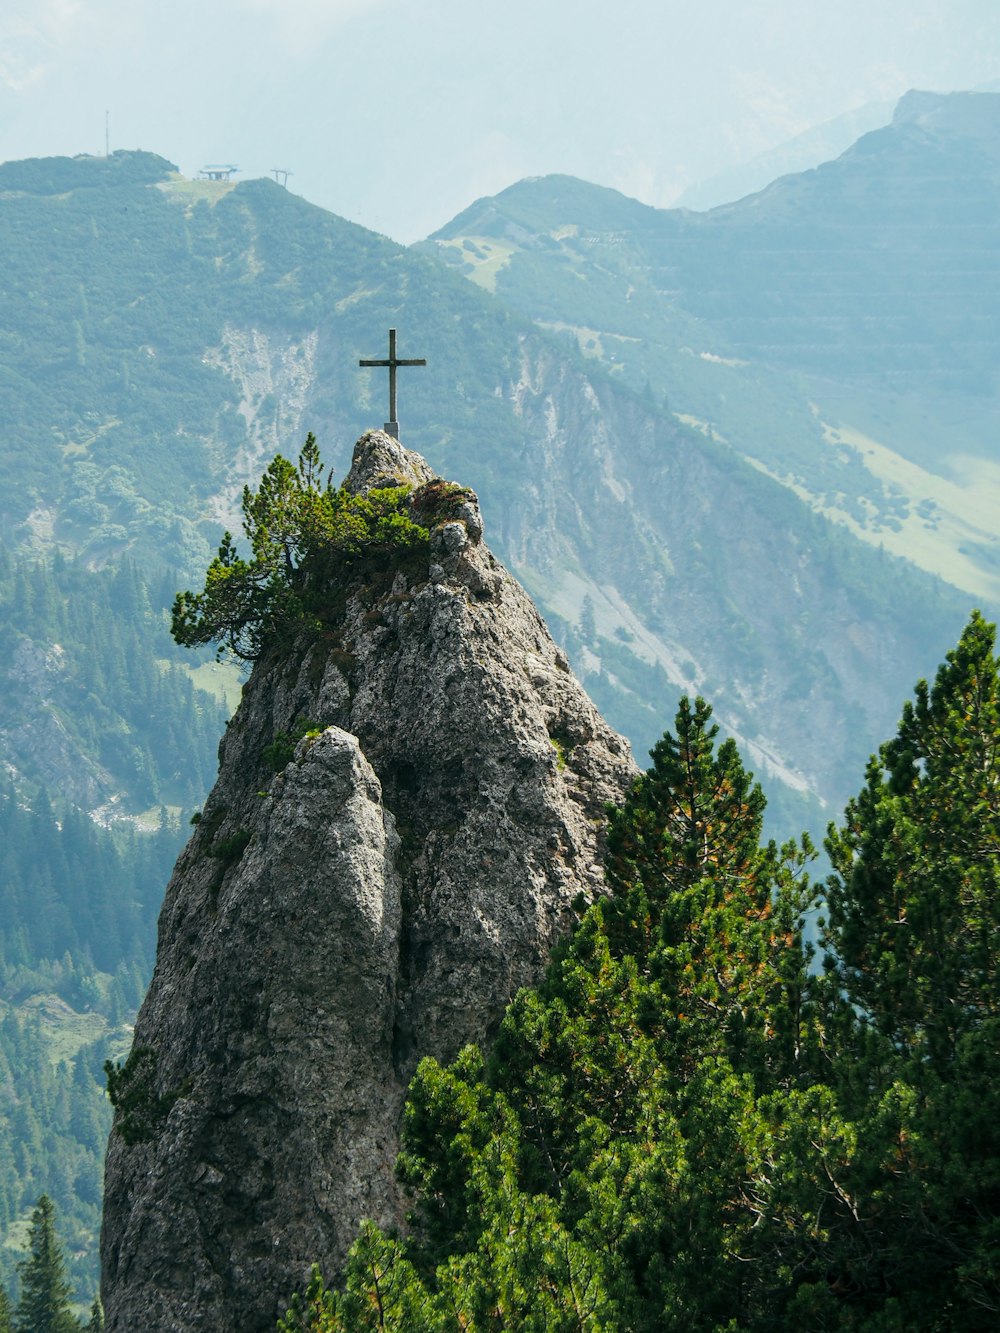 a cross on top of a rock in the mountains